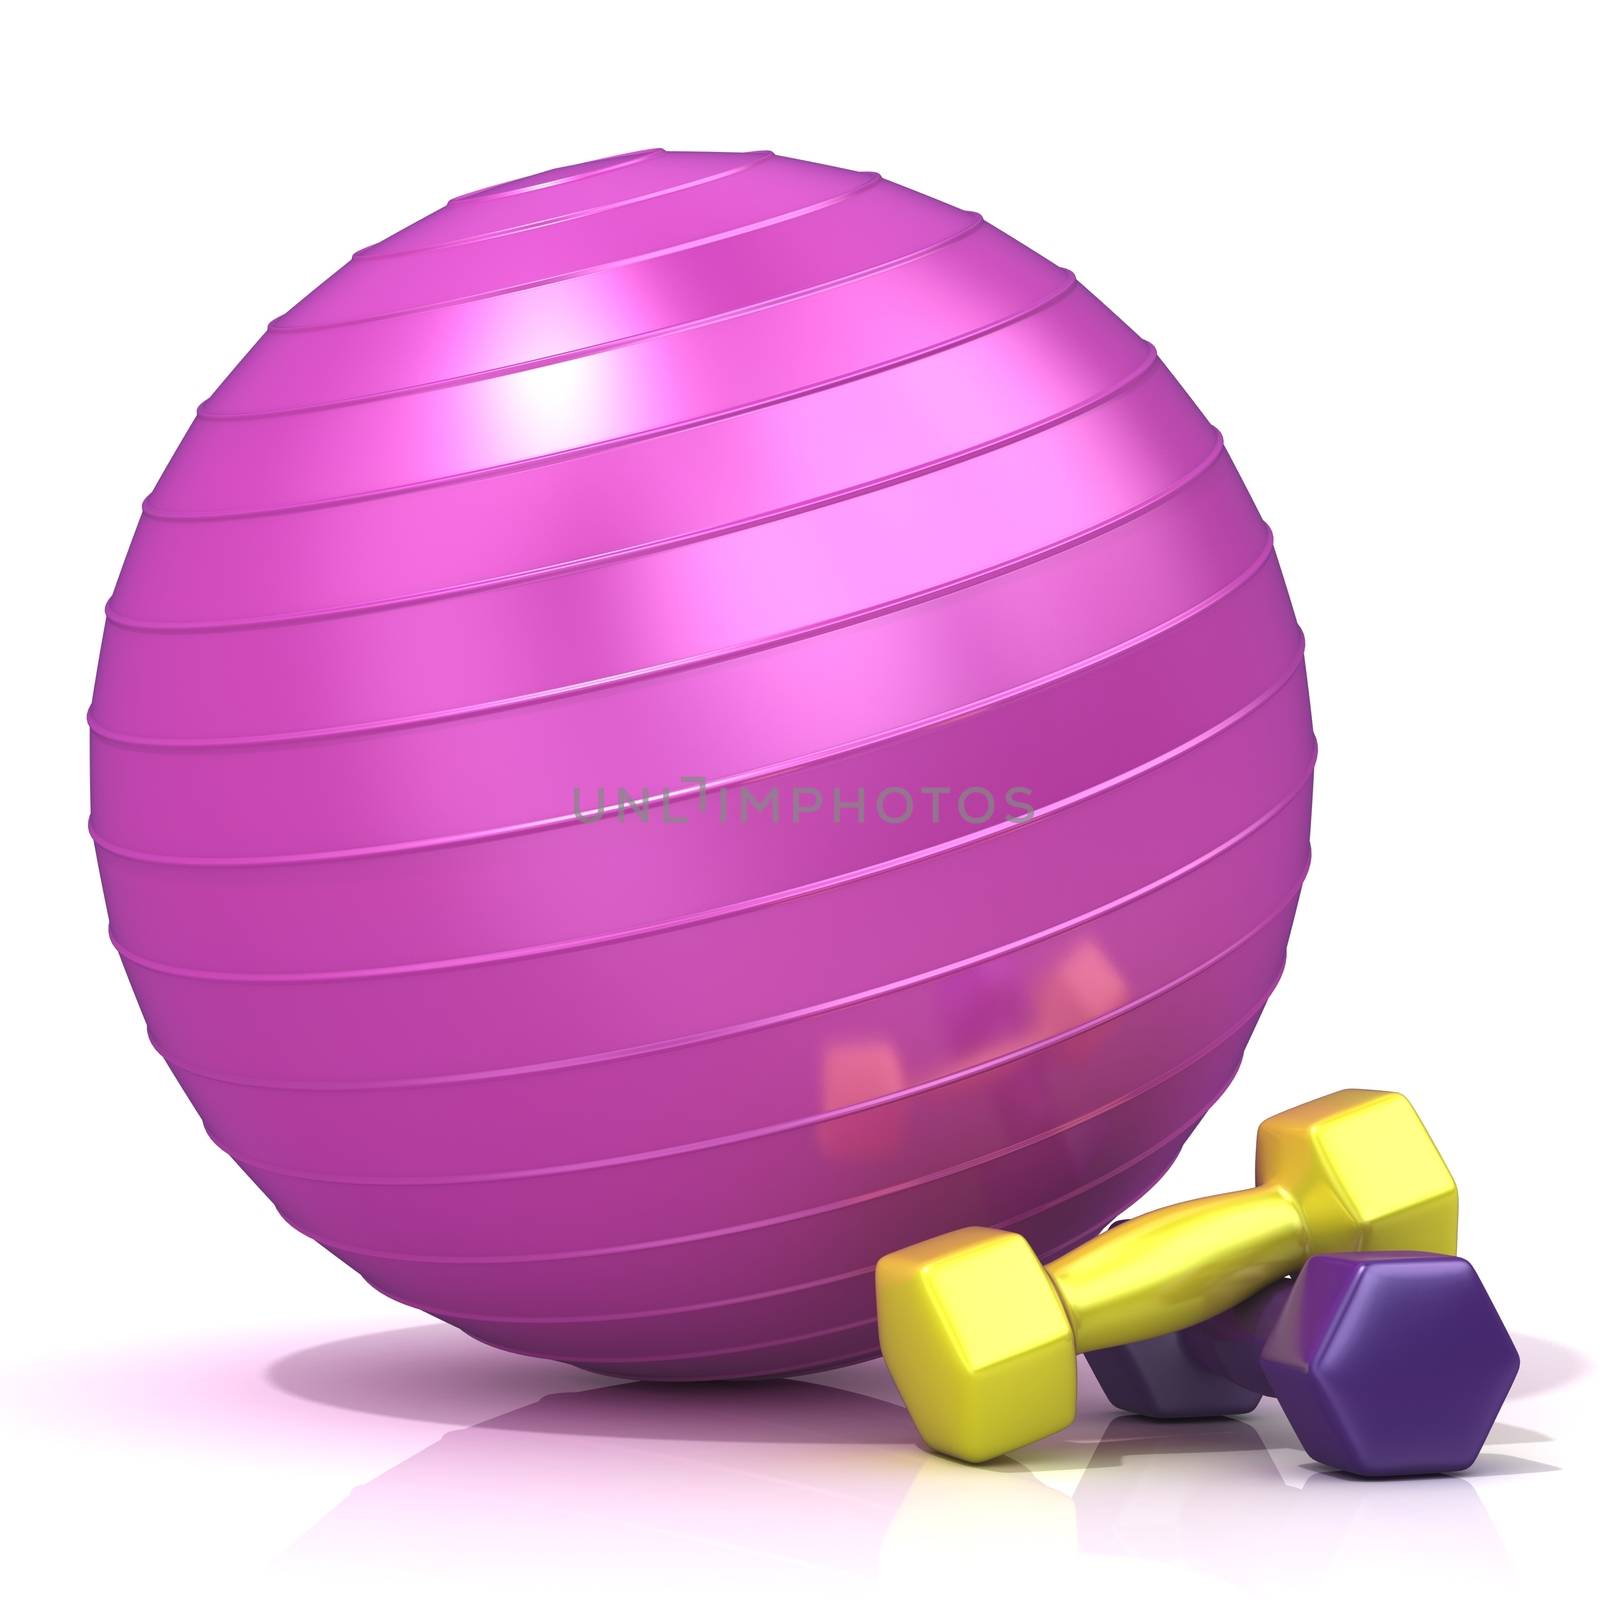 Violet fitness ball and weights by djmilic